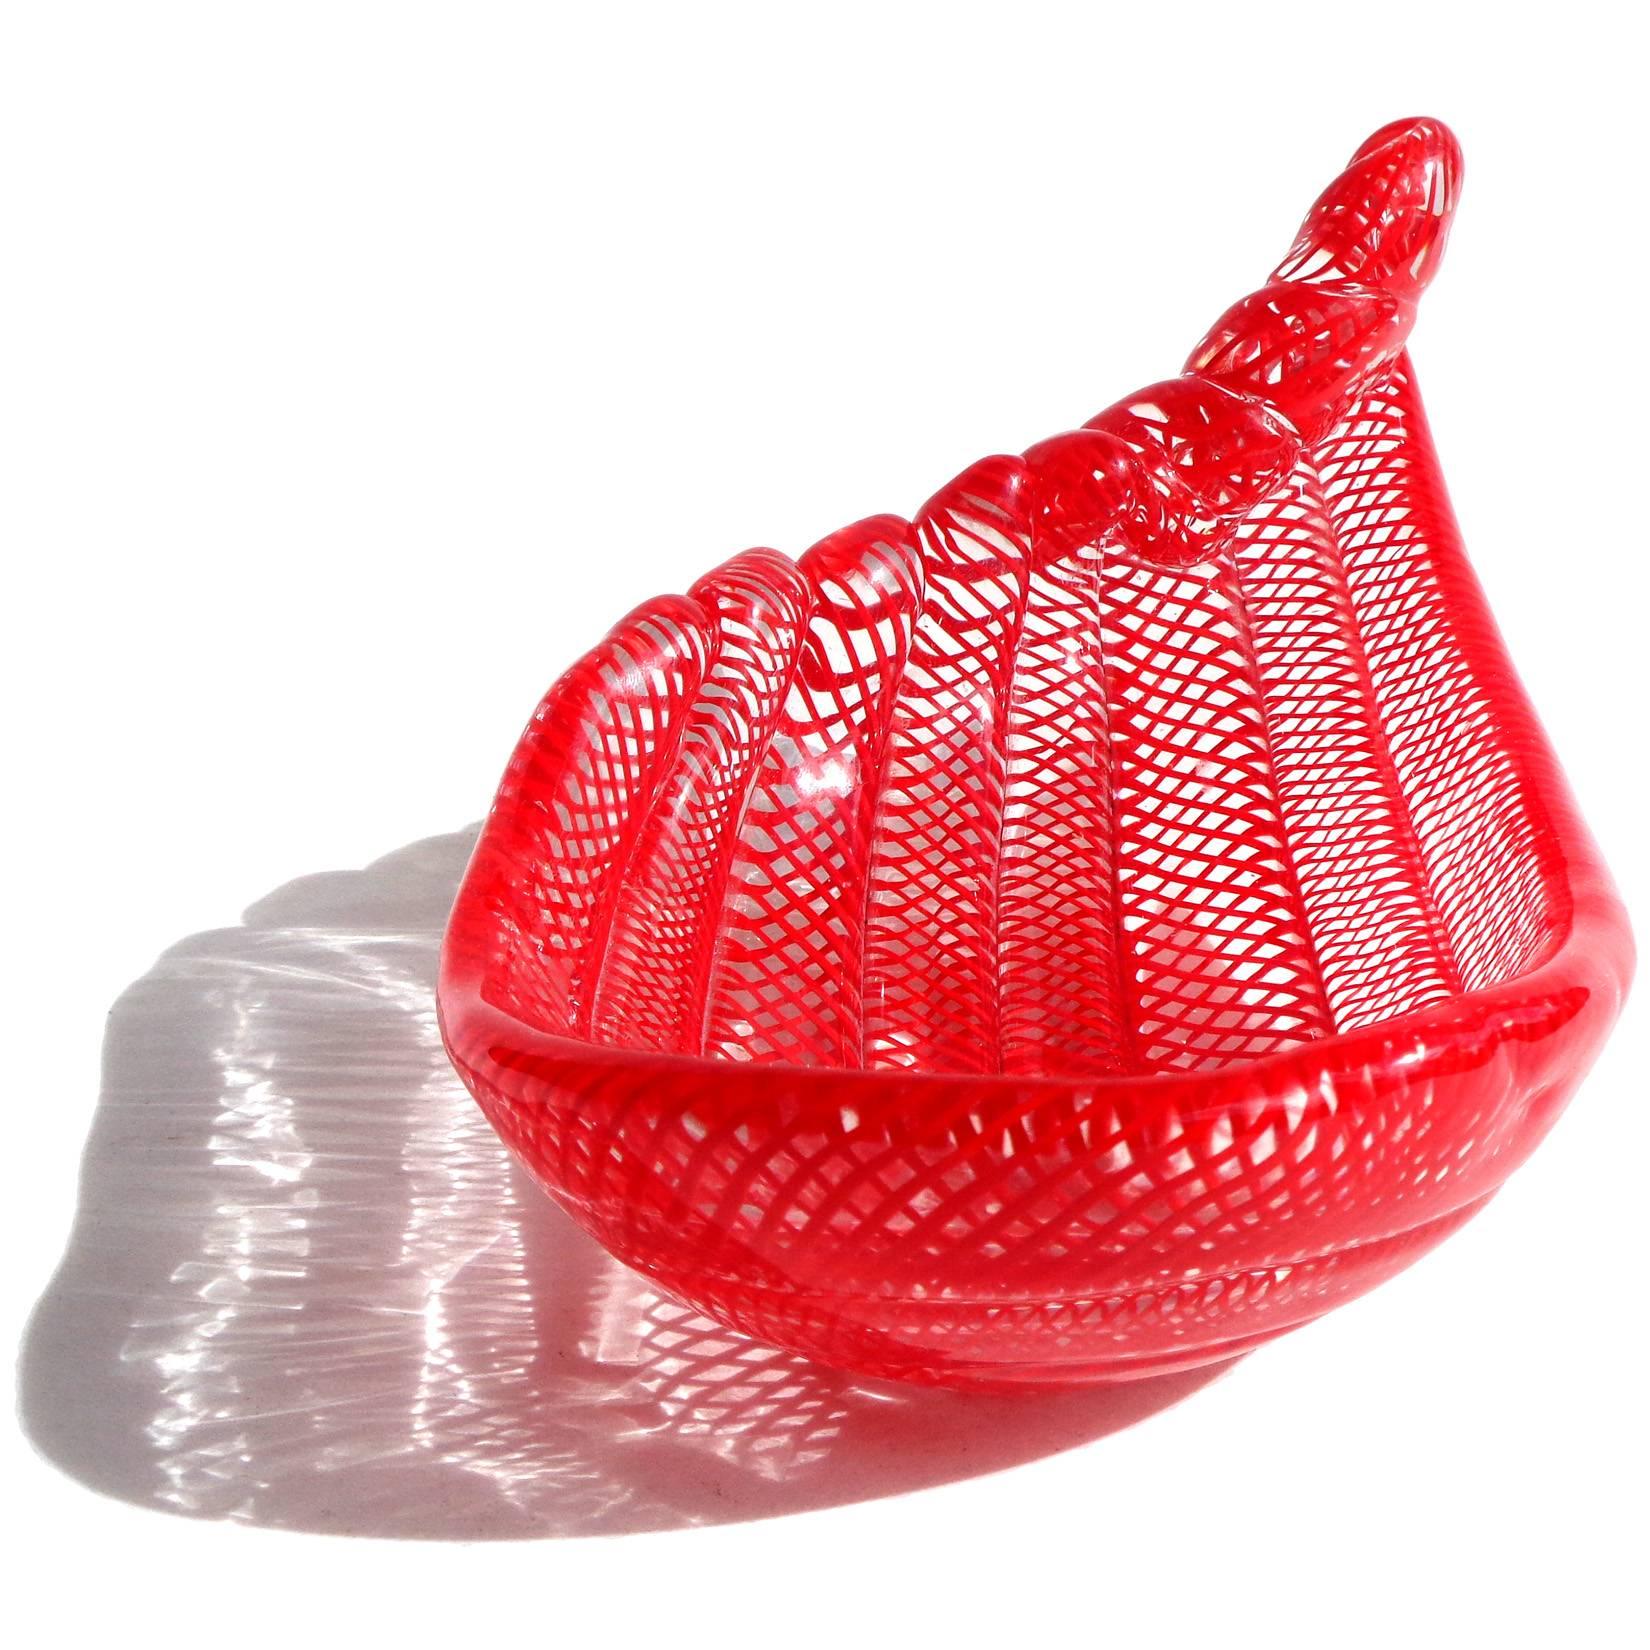 Gorgeous Murano hand blown bright red net ribbon design Italian art glass bowl/trinket dish. Made with large rods of glass looped around each other, with a scroll design at the top edge. Created in the manner of designer Dino Martens. Measures 7